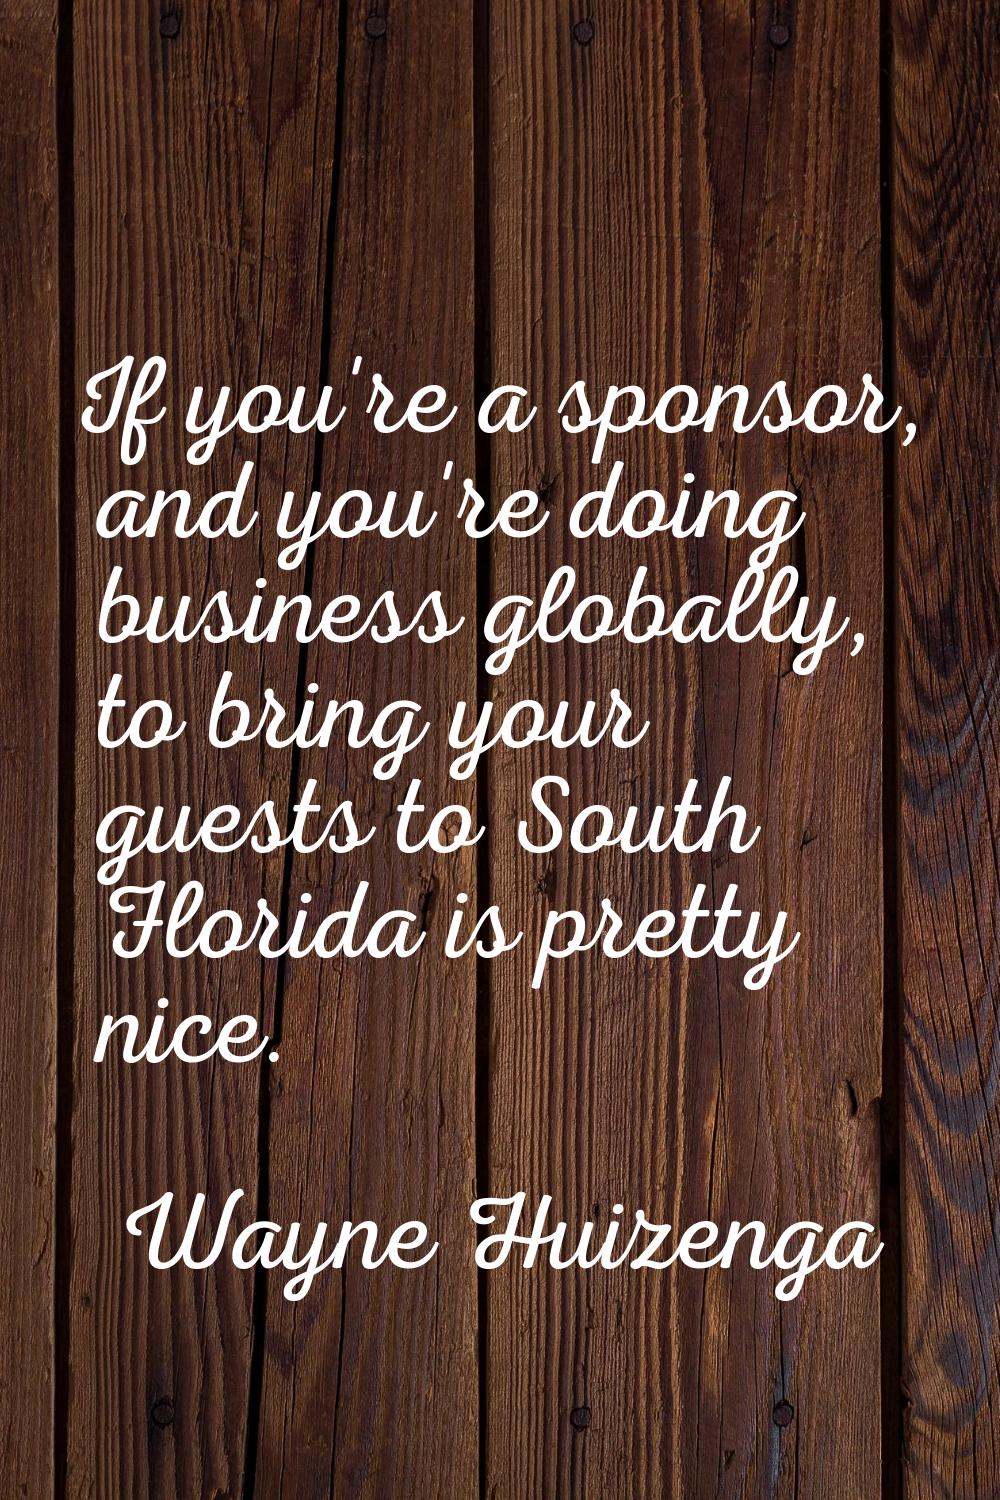 If you're a sponsor, and you're doing business globally, to bring your guests to South Florida is p